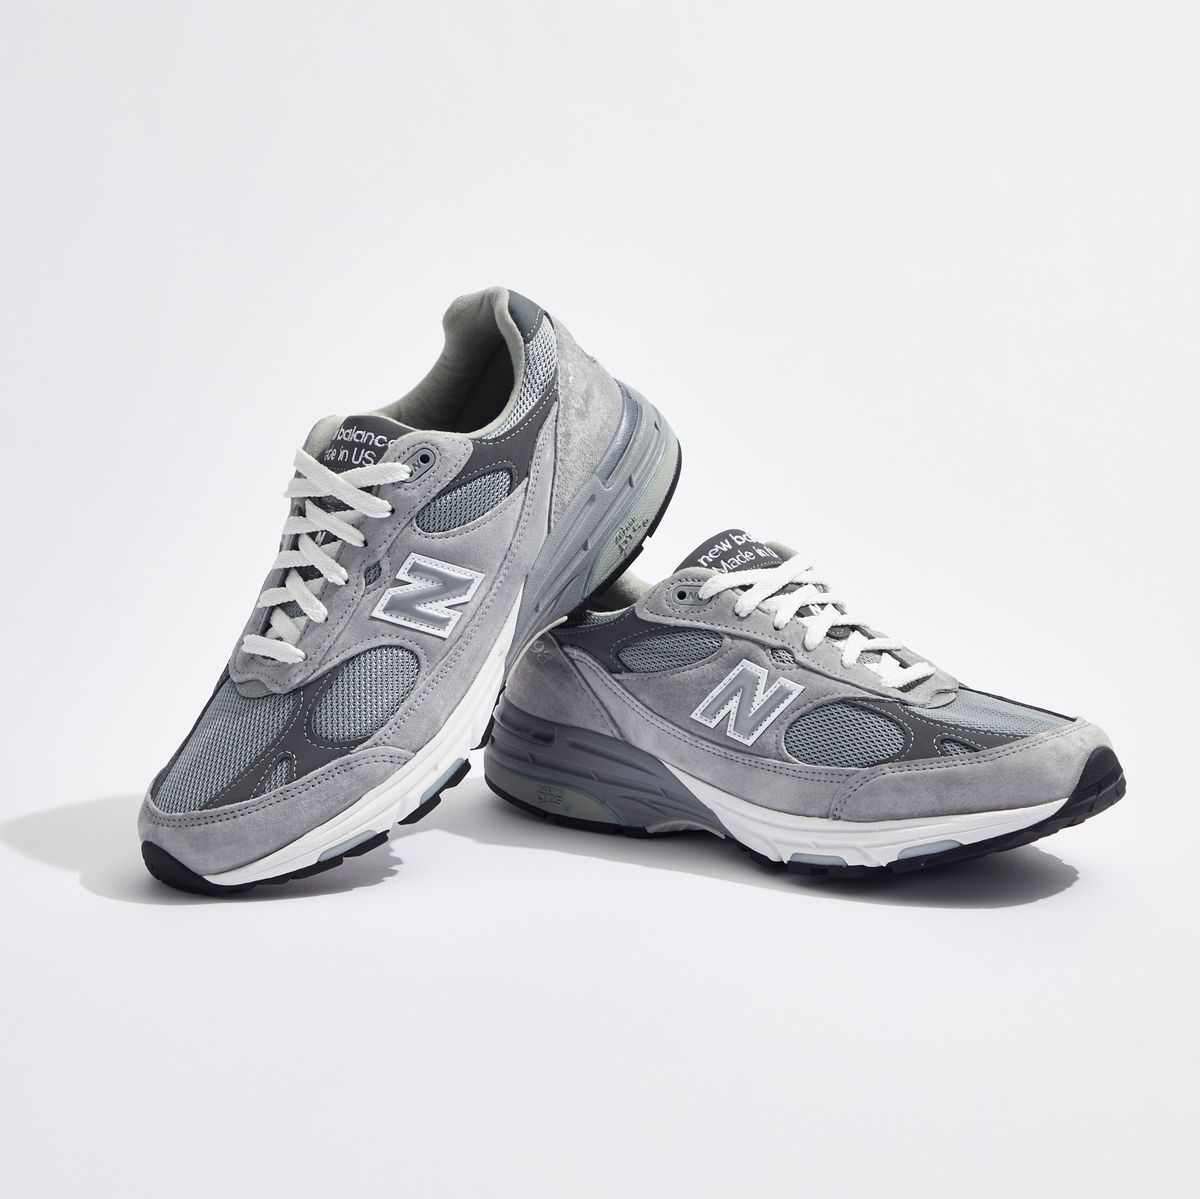 Parque jurásico Capilla clase New Balance 993 Made in US Sneaker Review, Price and Where to Buy